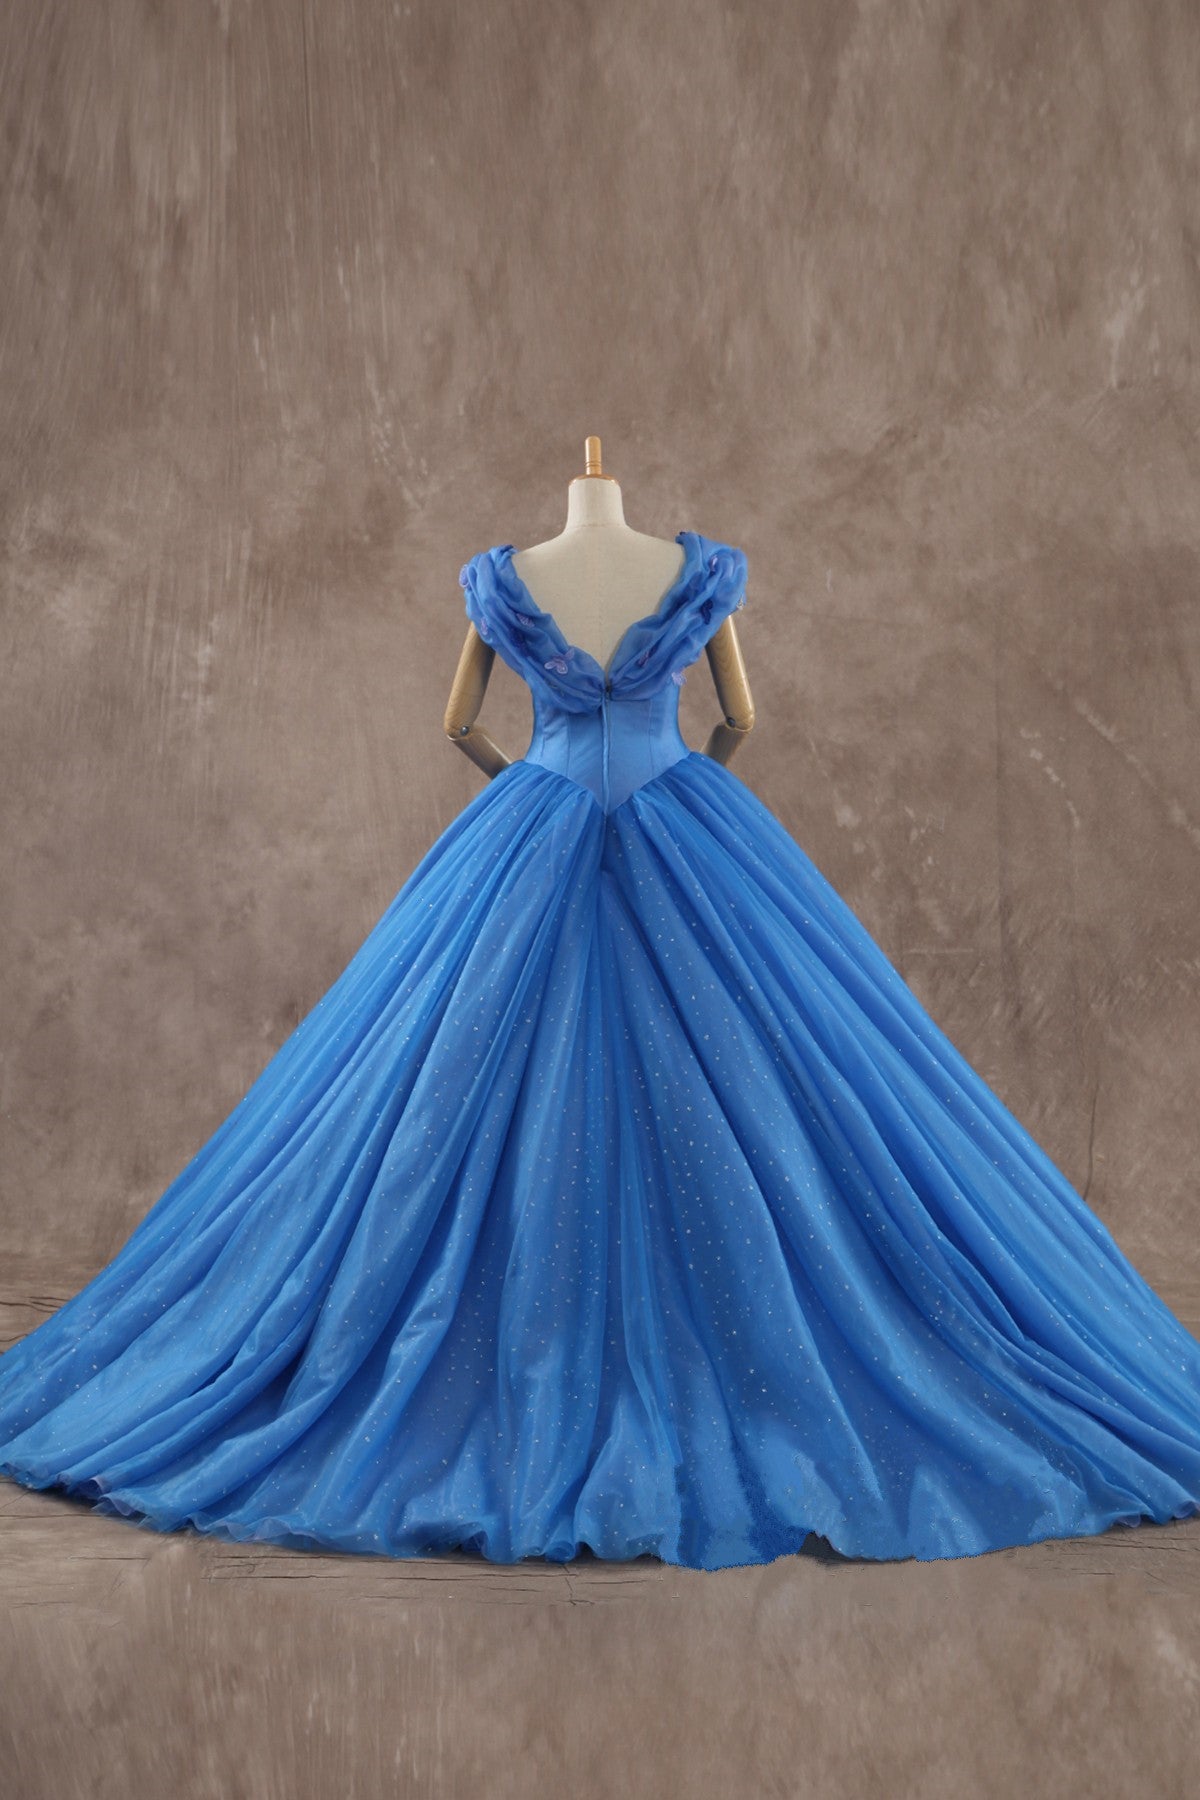 Vintage Princess Long Black Prom Dress With Butterfly Crystal Ball Gown And  Off Shoulder Design In Light Sky Blue In Stock! Affordable Cinderella  Evening Gresses. From Manweisi, $95 | DHgate.Com